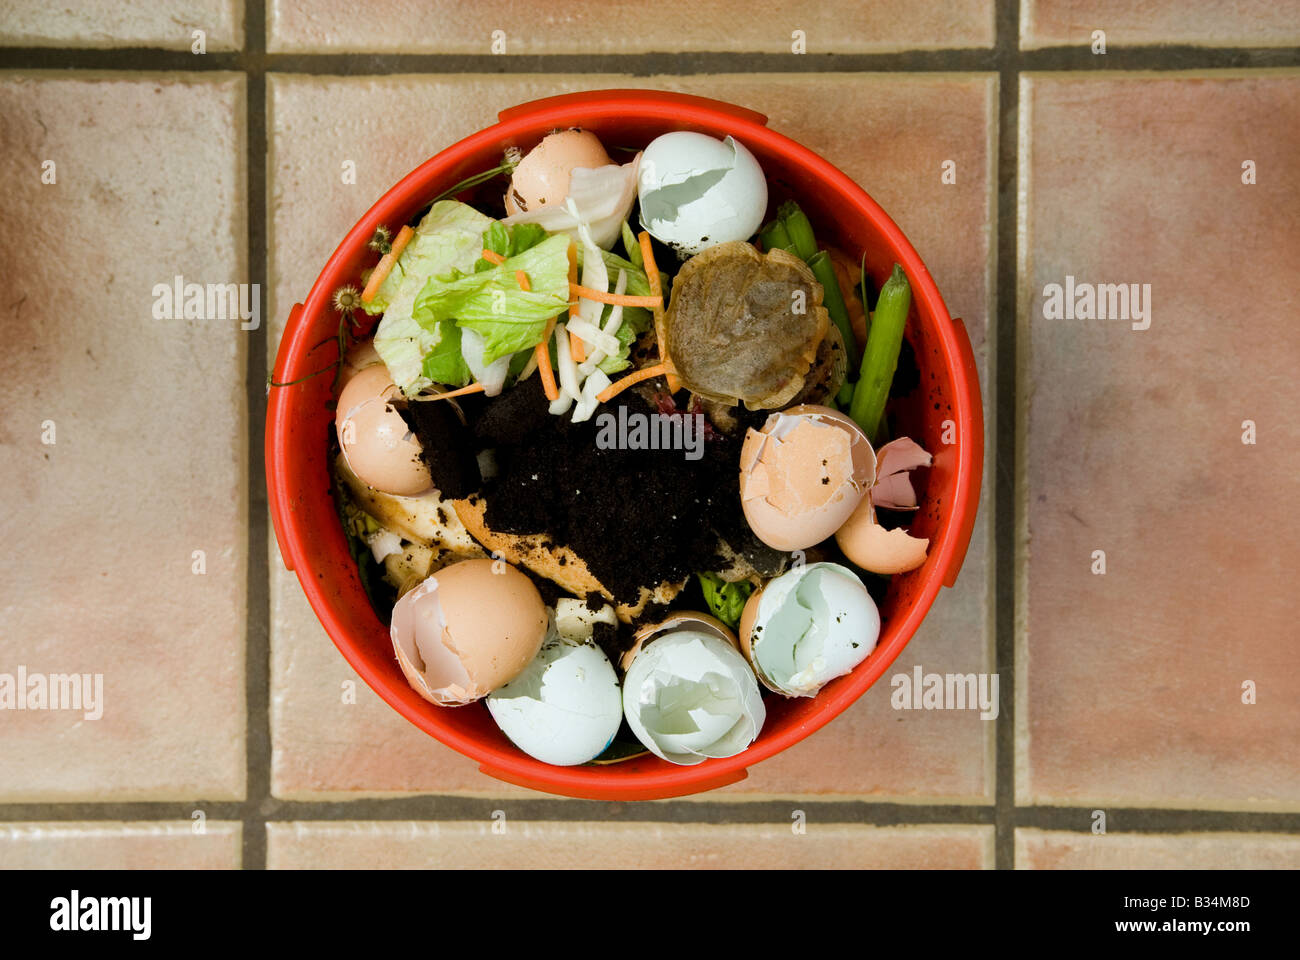 Kitchen waste ready for composting, Bawdsey, Suffolk, UK. Stock Photo